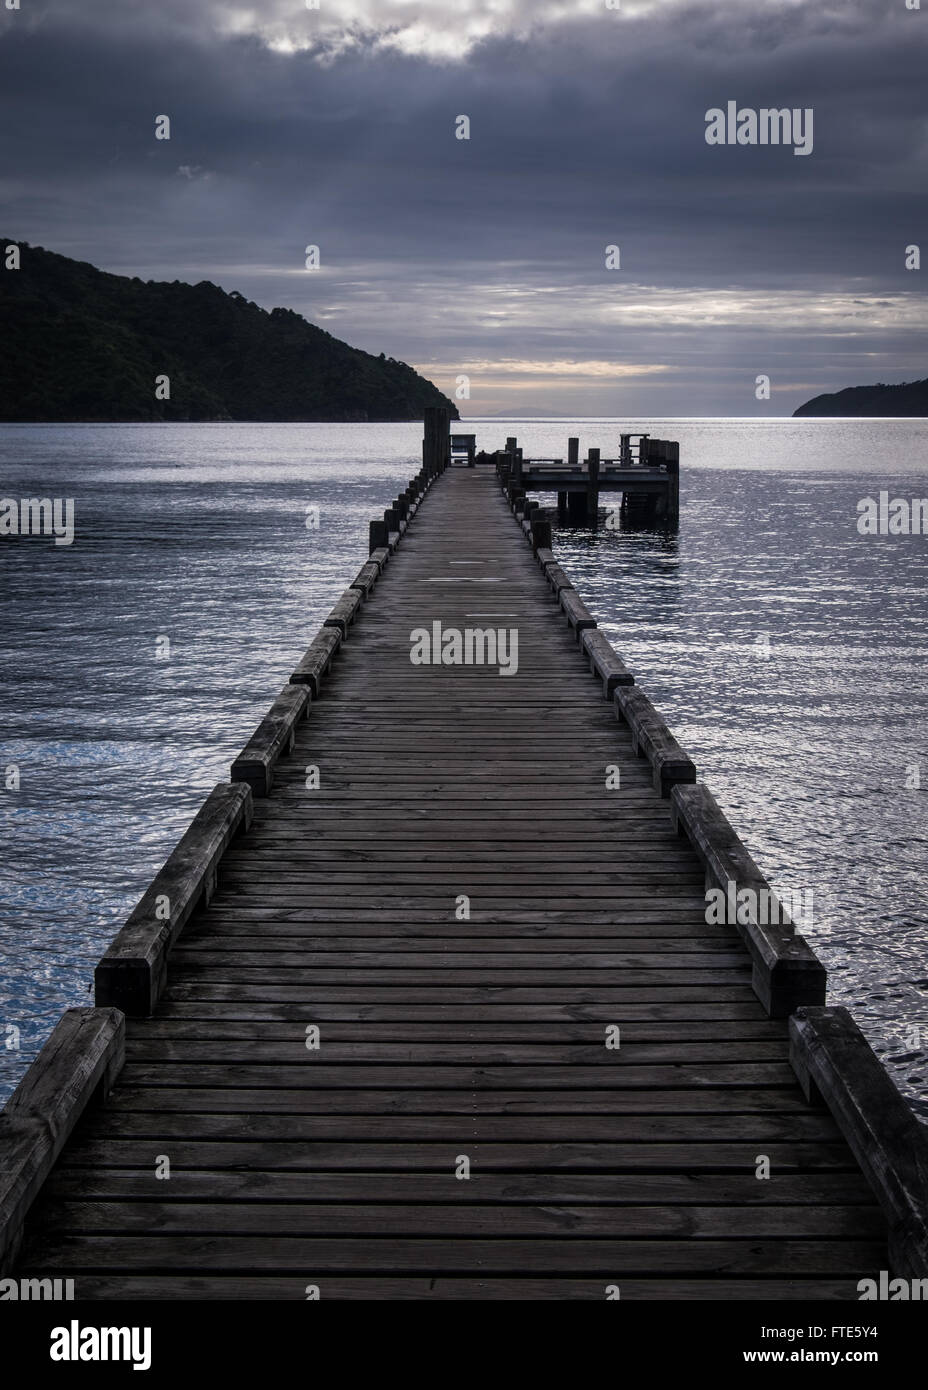 The wooden jetty at ship's Cove in the Marlborough Sounds, New Zealand. Stock Photo